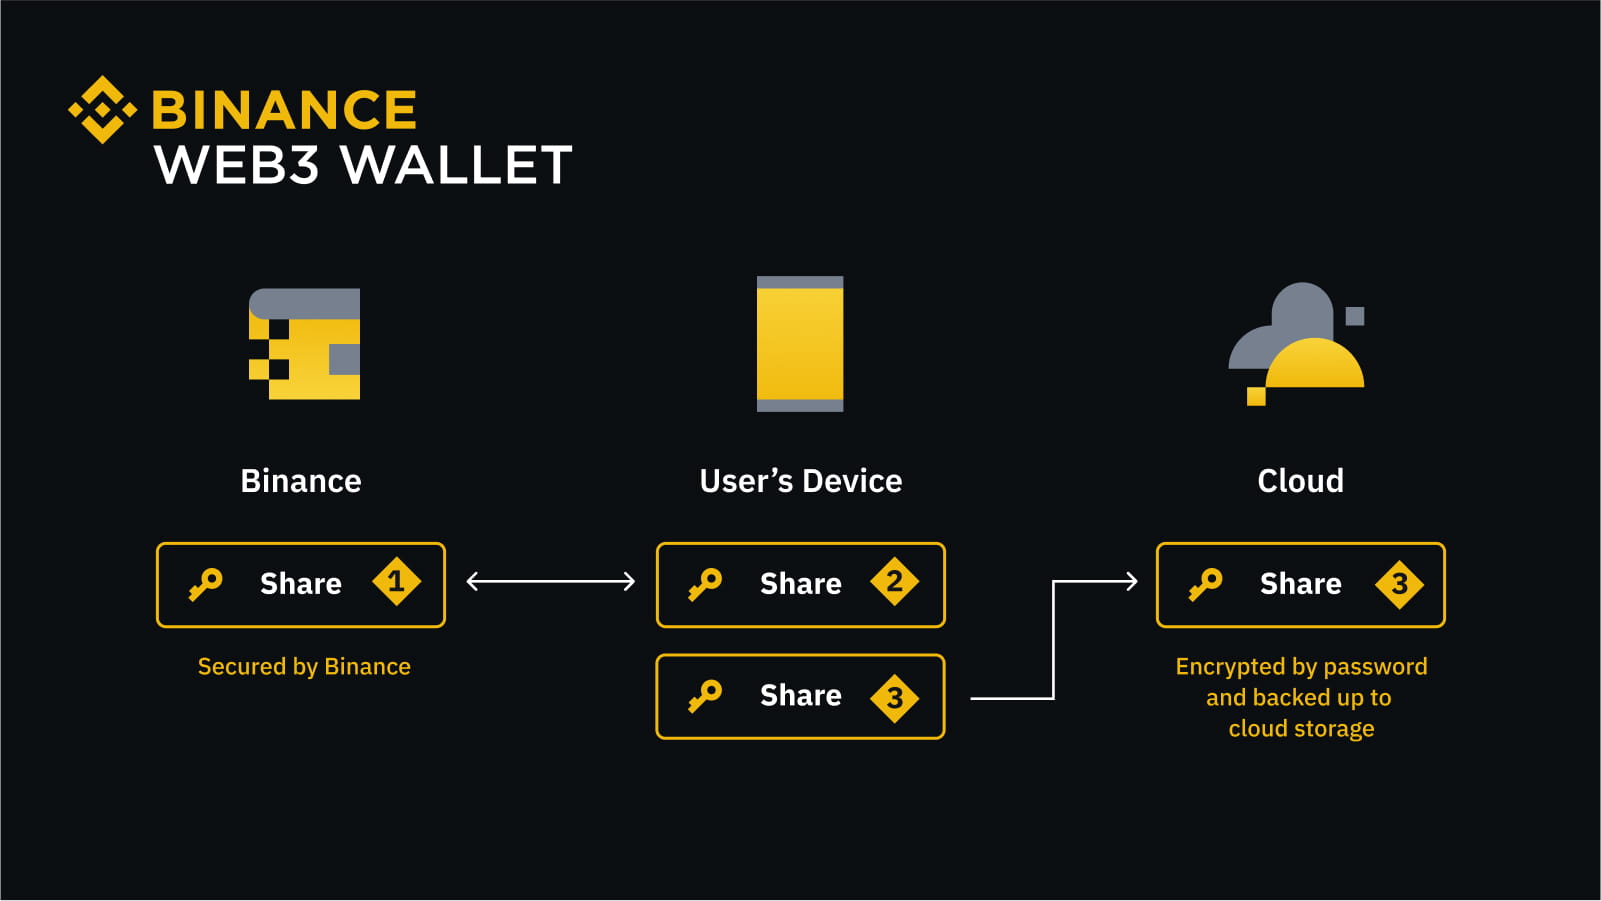 Binance Introduces New Web3 Wallet Service to Broaden DeFi and dApps Adoption